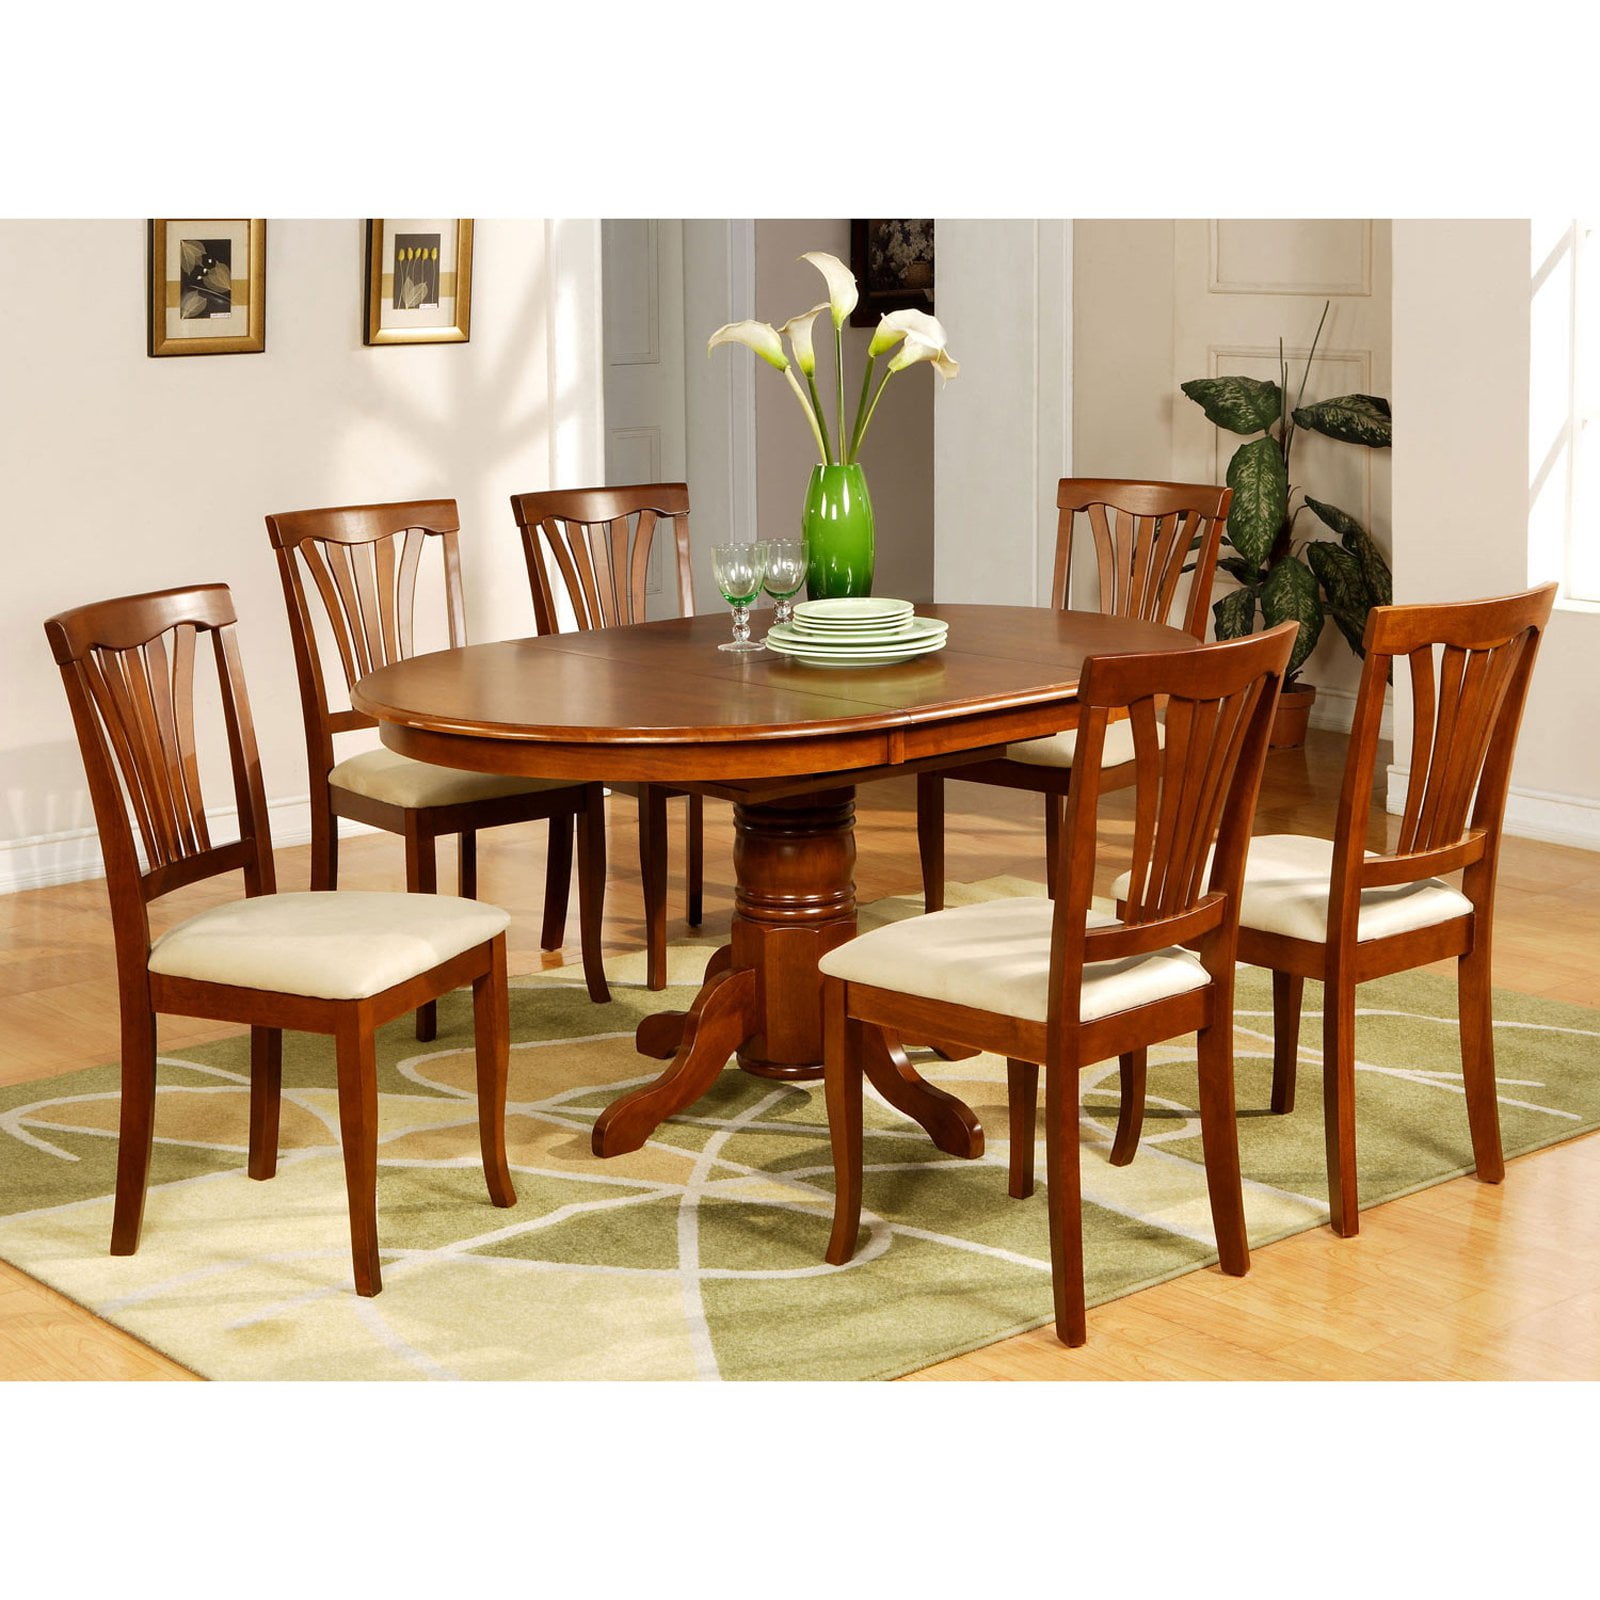 East West Furniture Avon 5 Piece Pedestal Oval Dining Table Set with